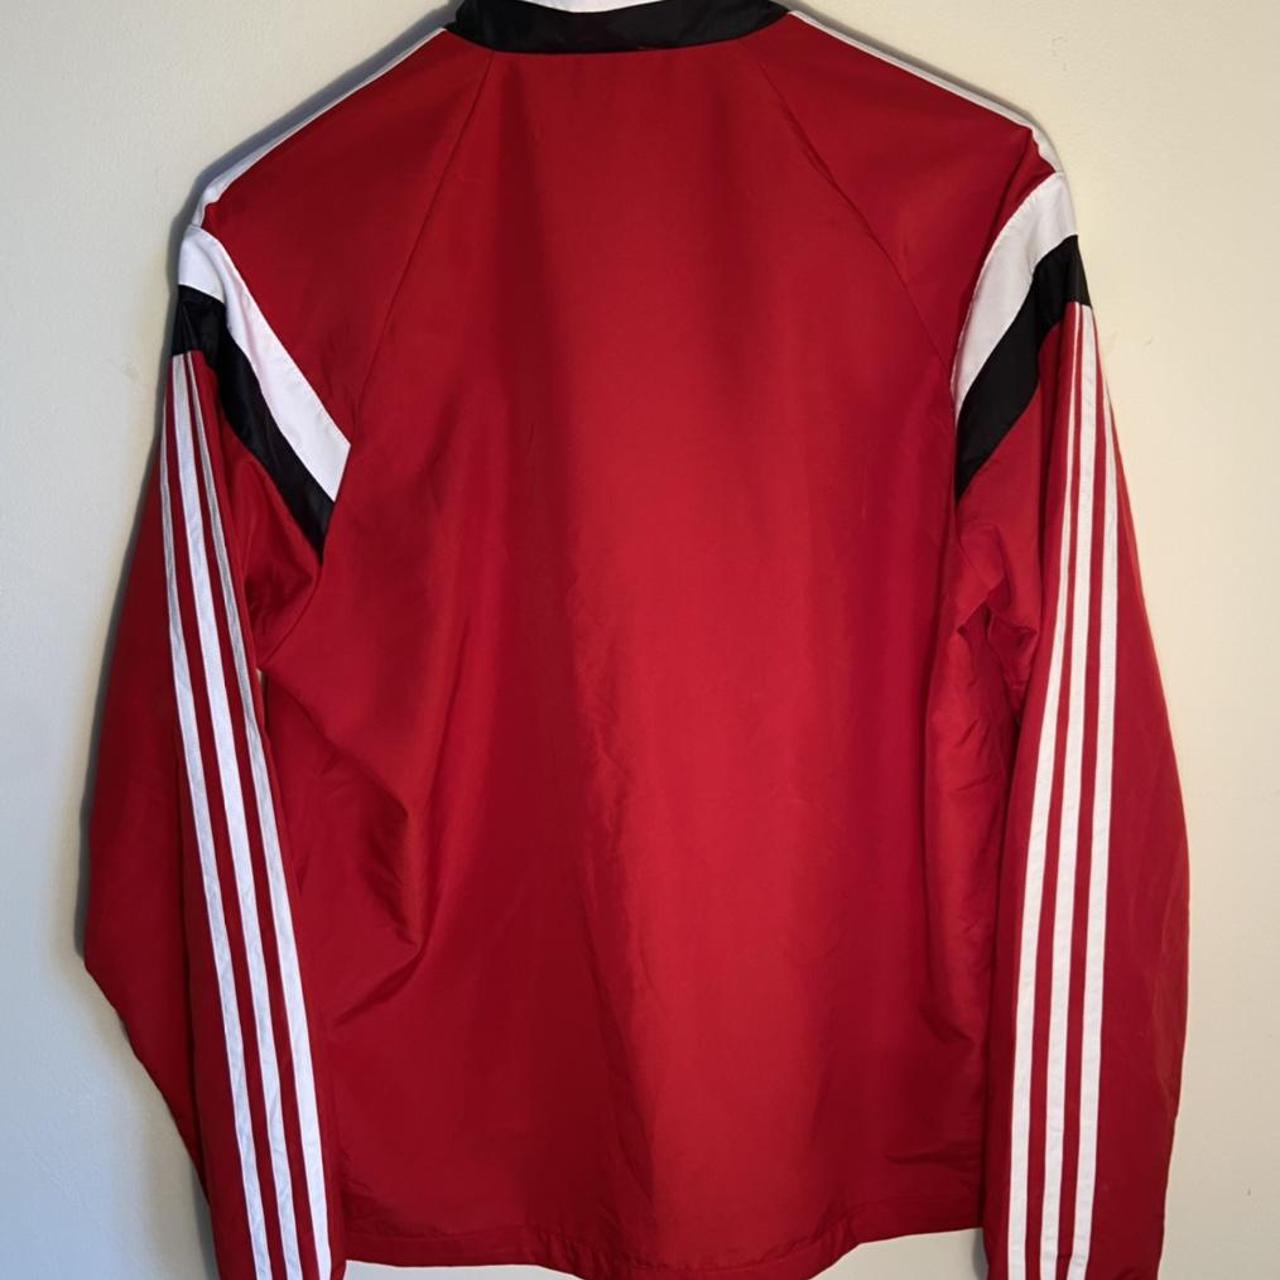 Vintage Adidas Track Jacket In Red with White and... - Depop